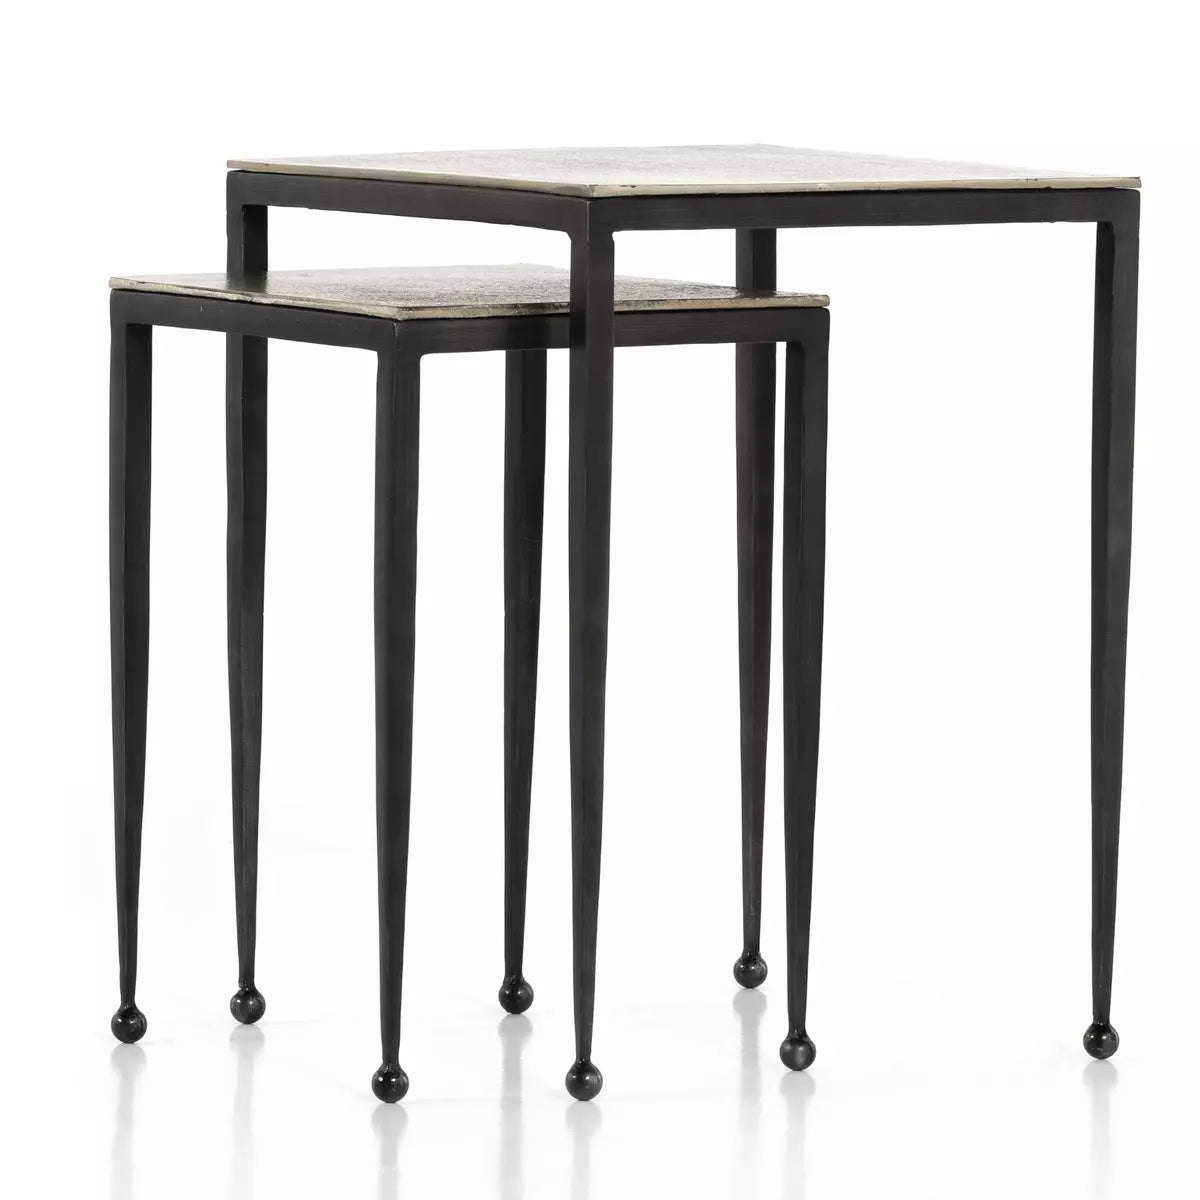 Dalston Nesting End Tables